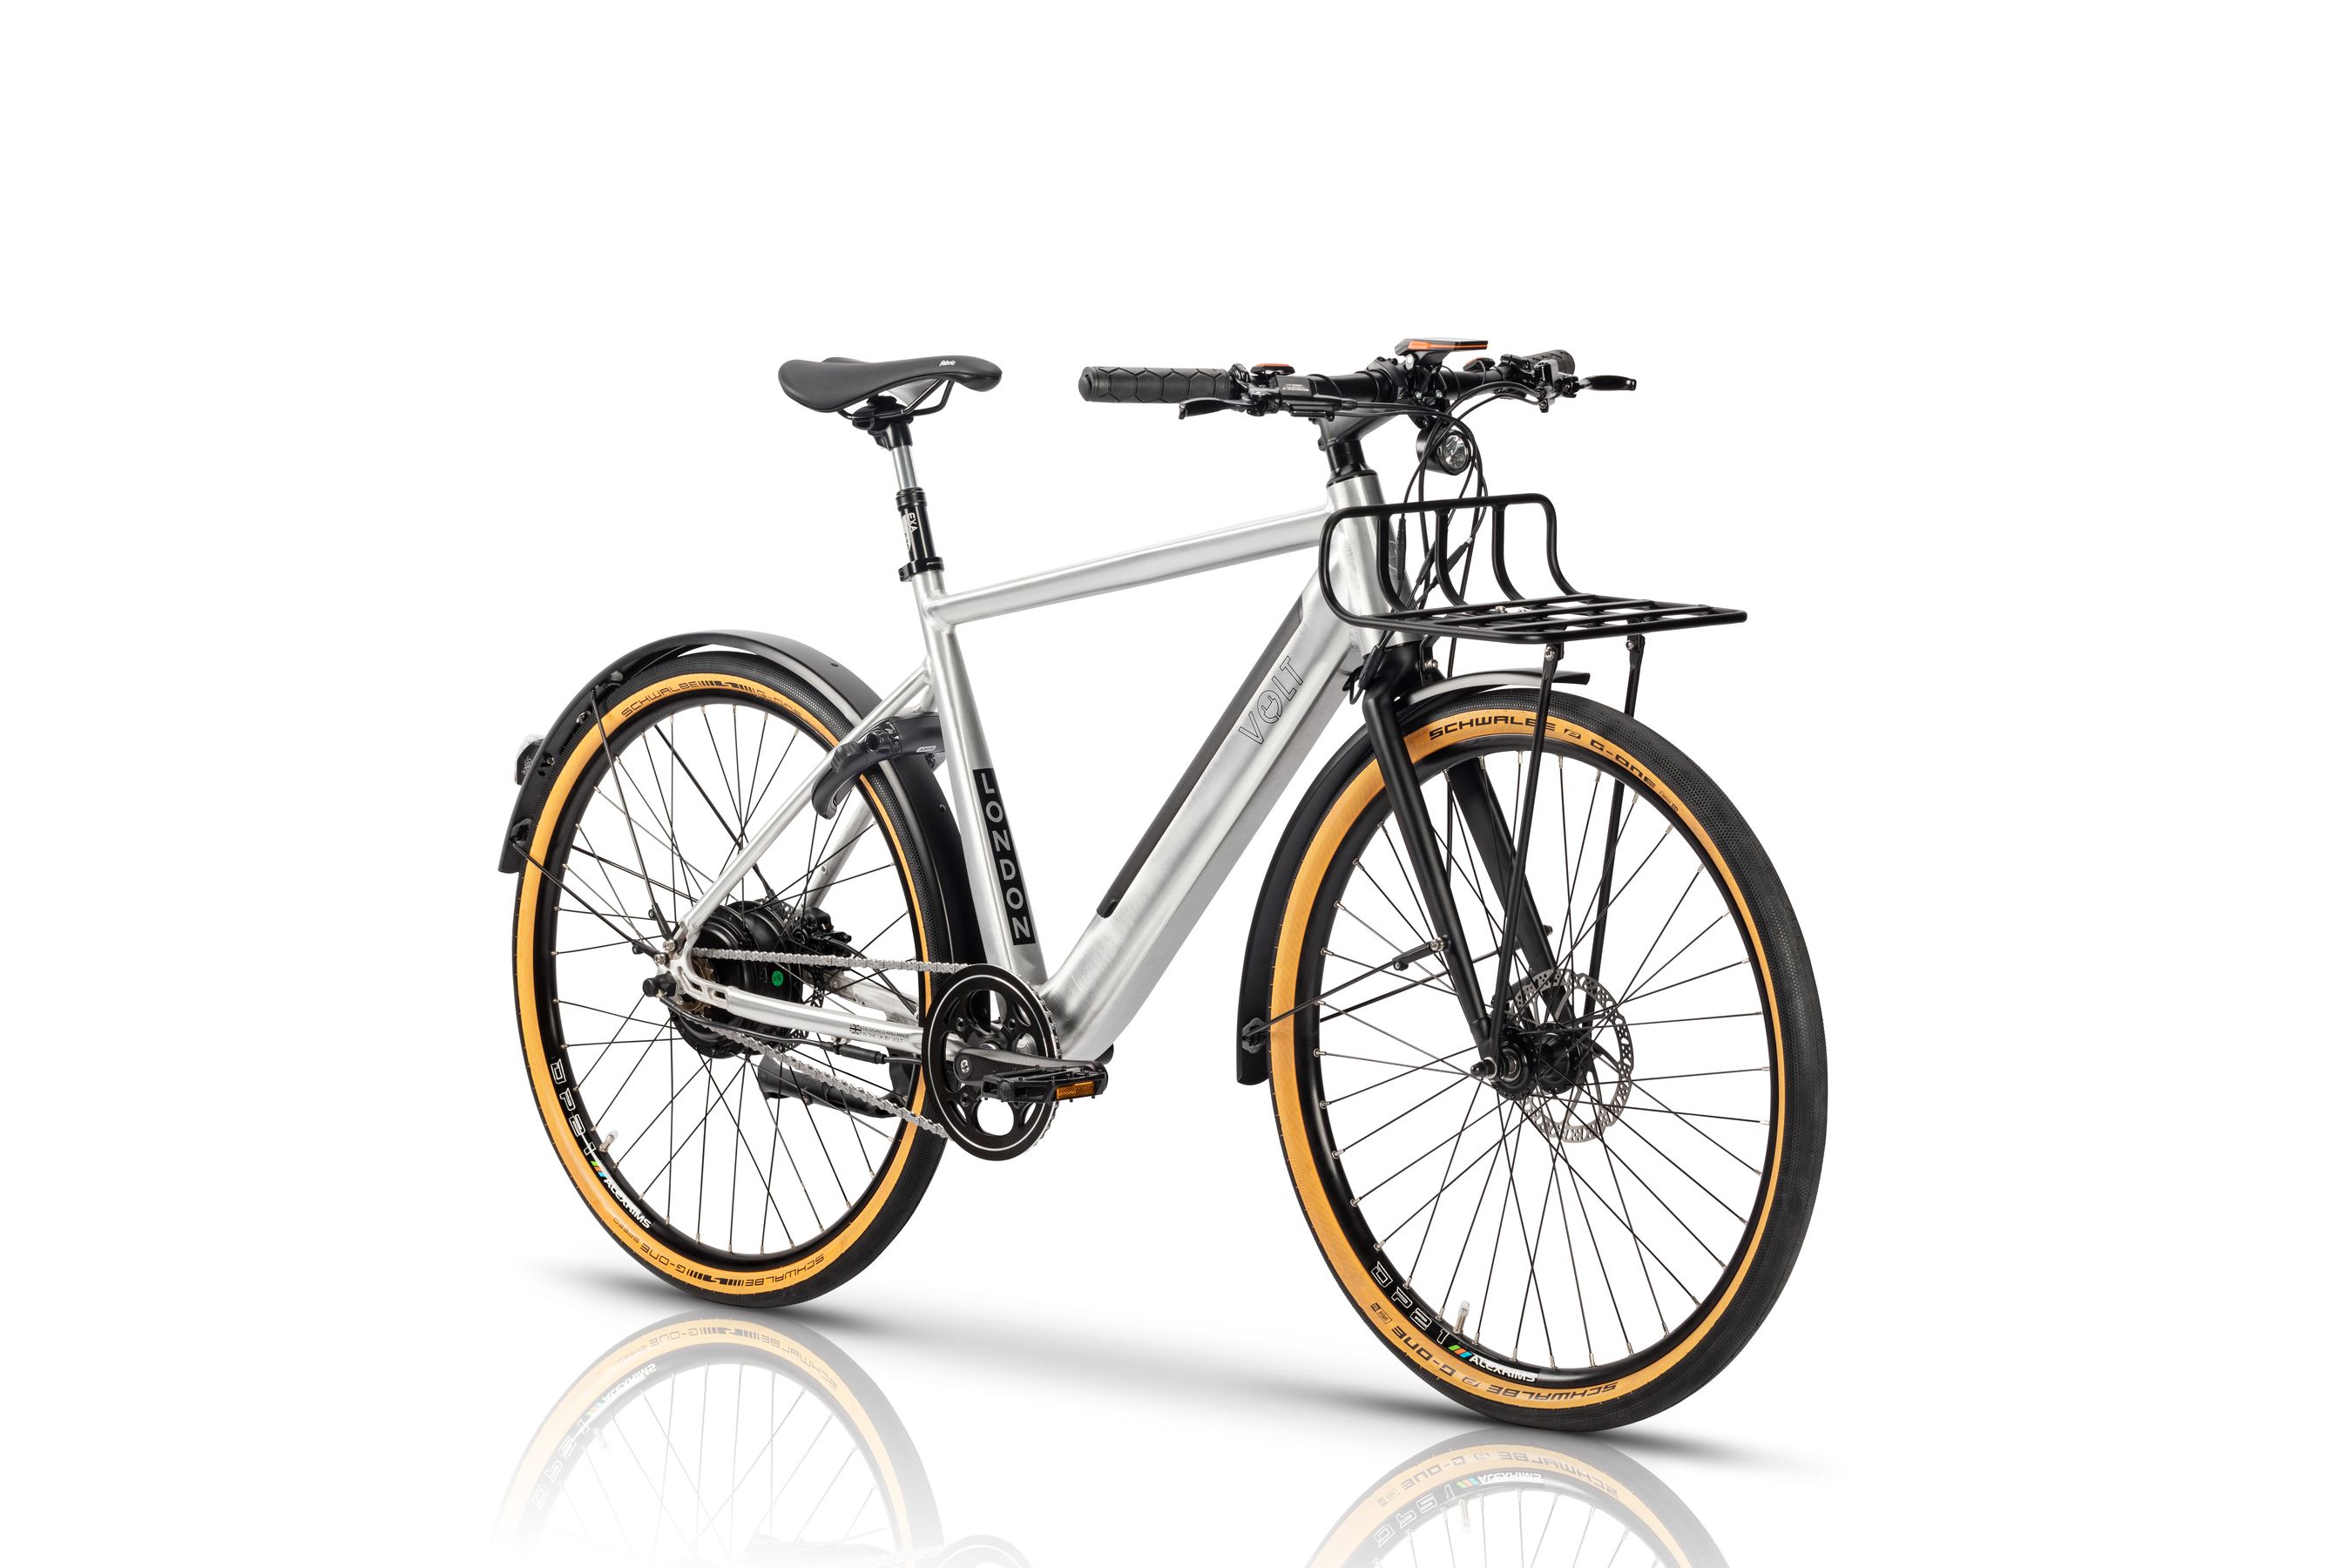 Volt London Urban E-bike straight studio photograph side on with a white background